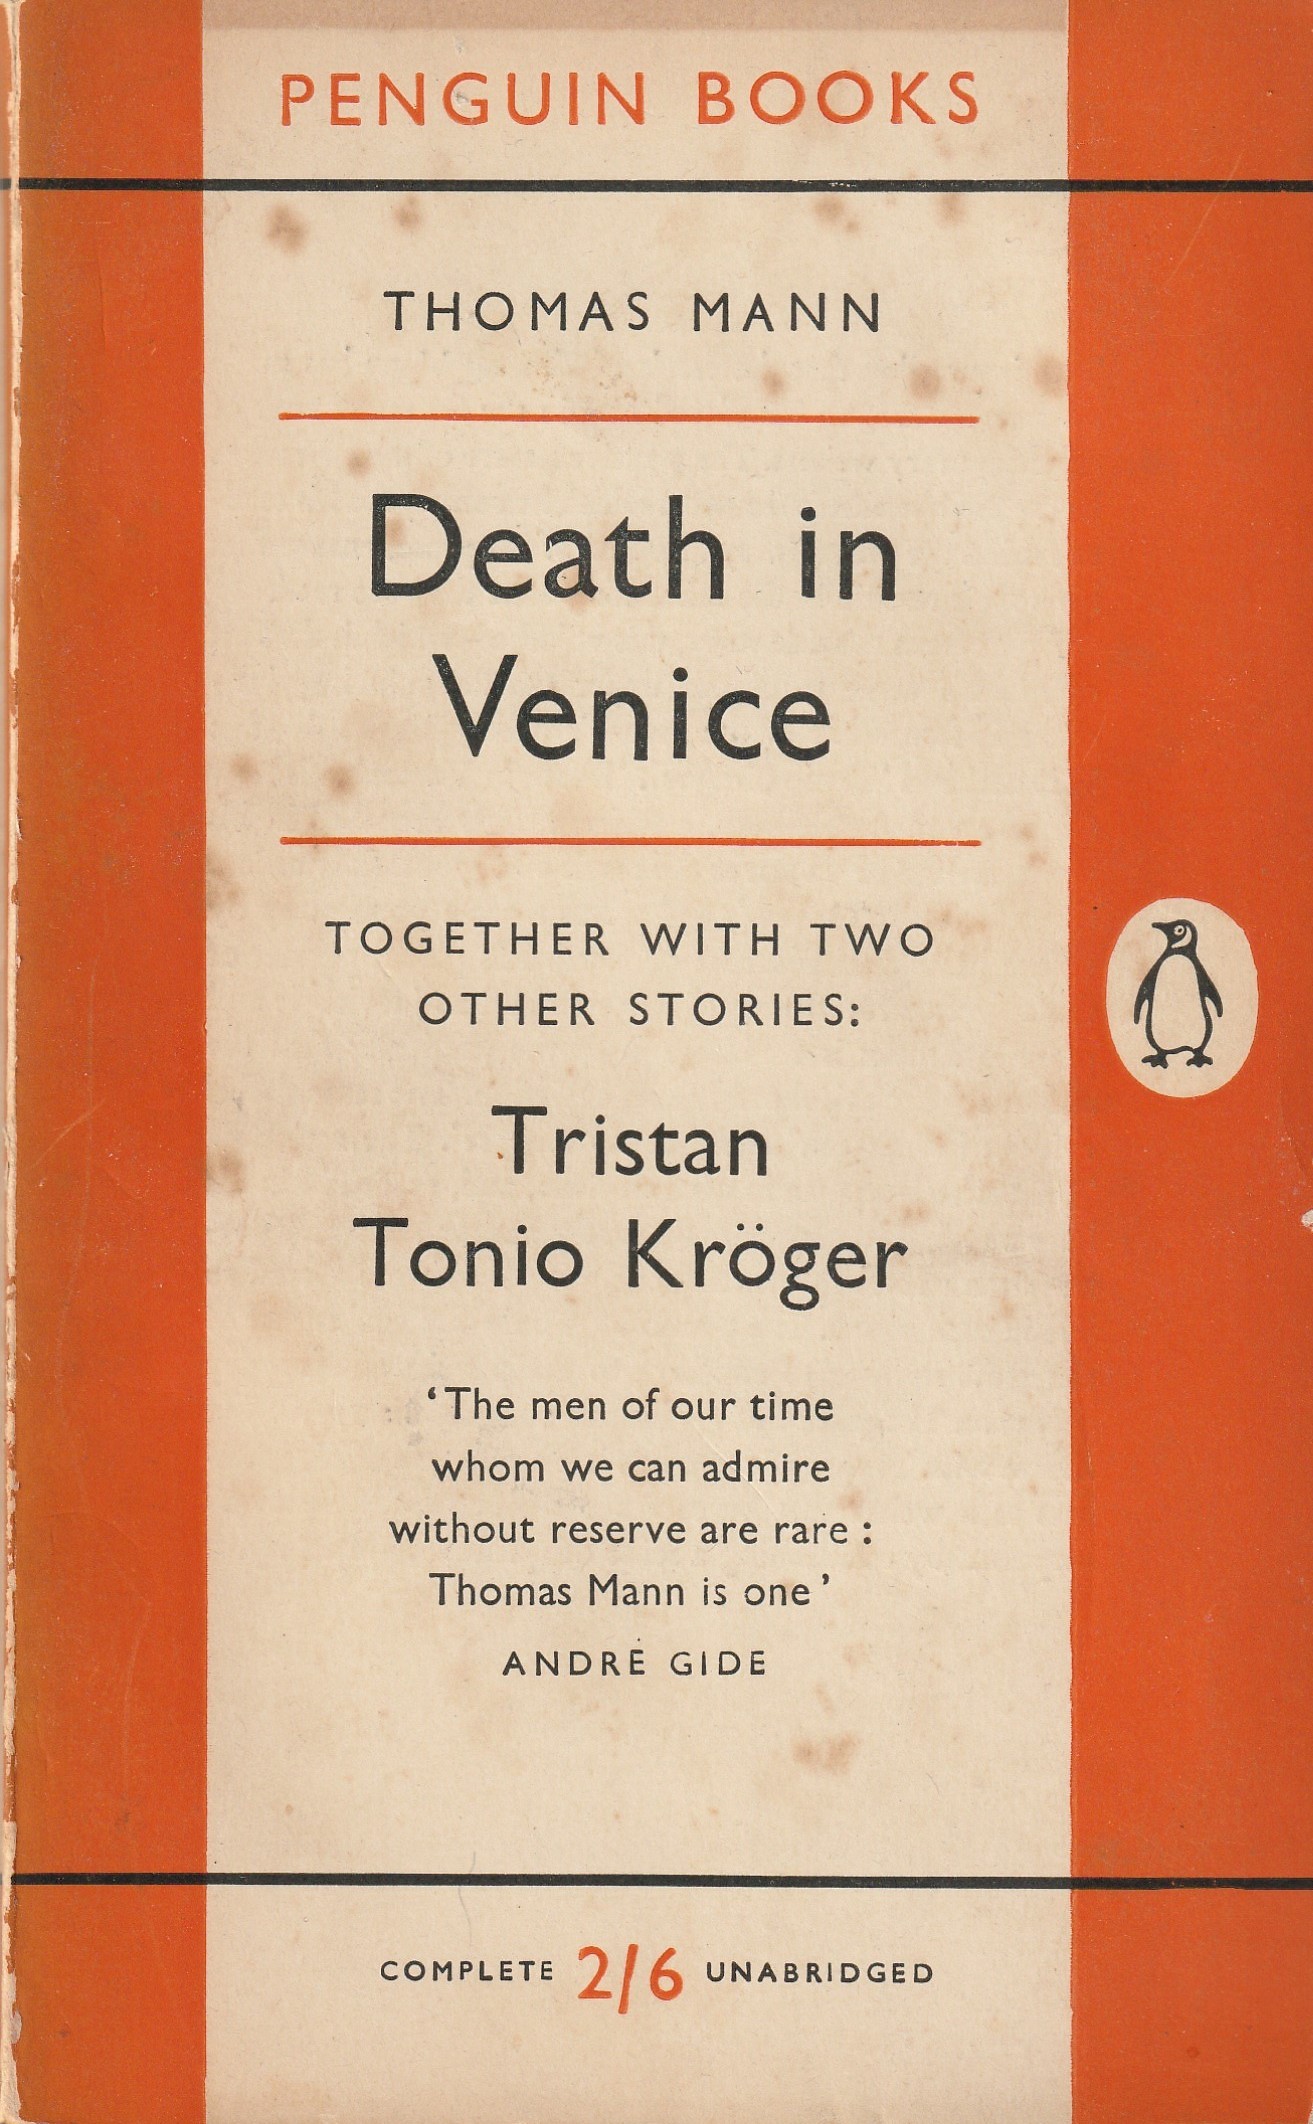 A book cover: Death in Venice, by Thomas Mann, in an early Penguin edition.